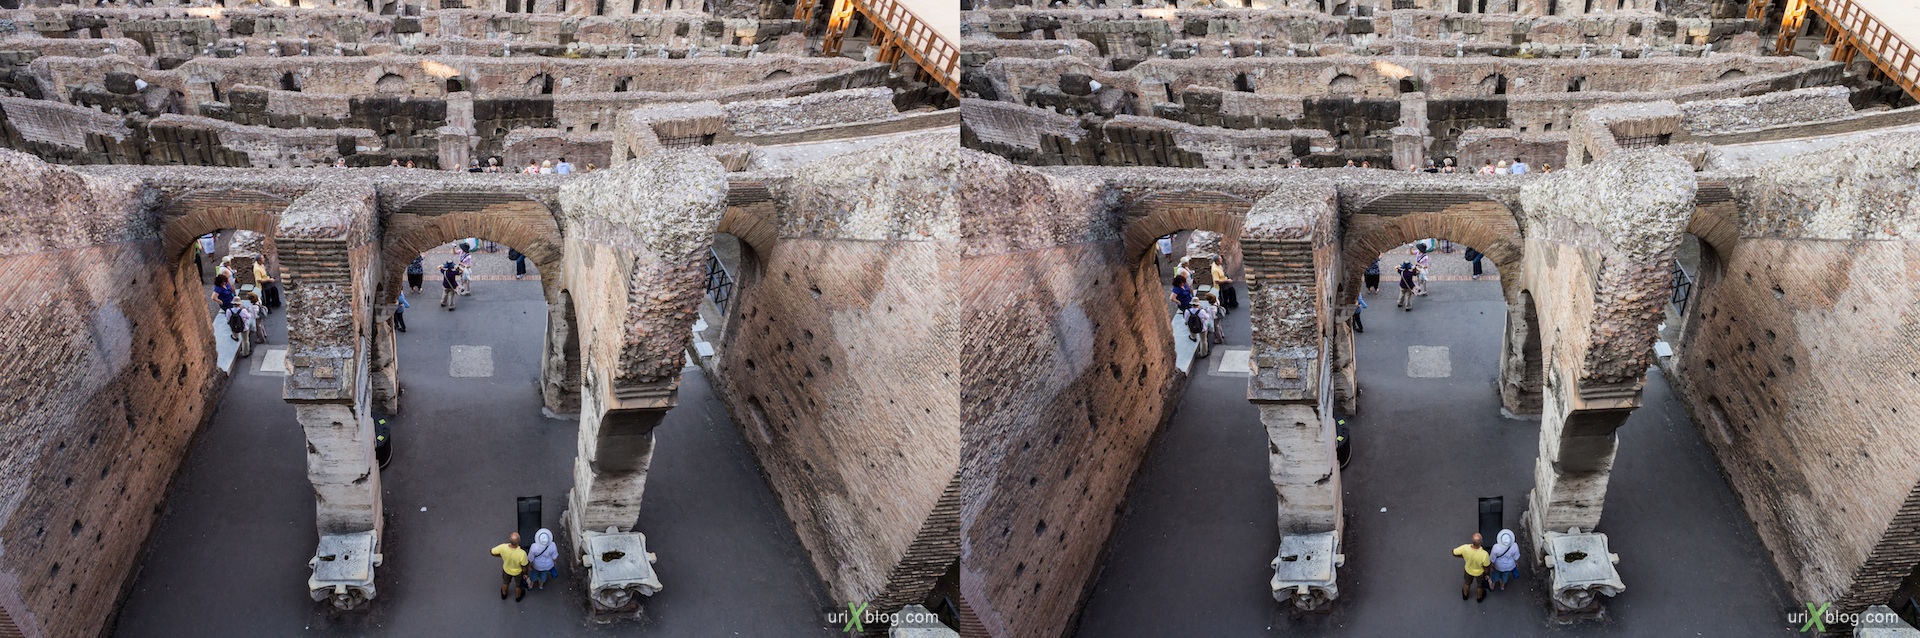 2012, Colosseum, Coliseum, Flavian Amphitheatre, Rome, Italy, 3D, stereo pair, cross-eyed, crossview, cross view stereo pair